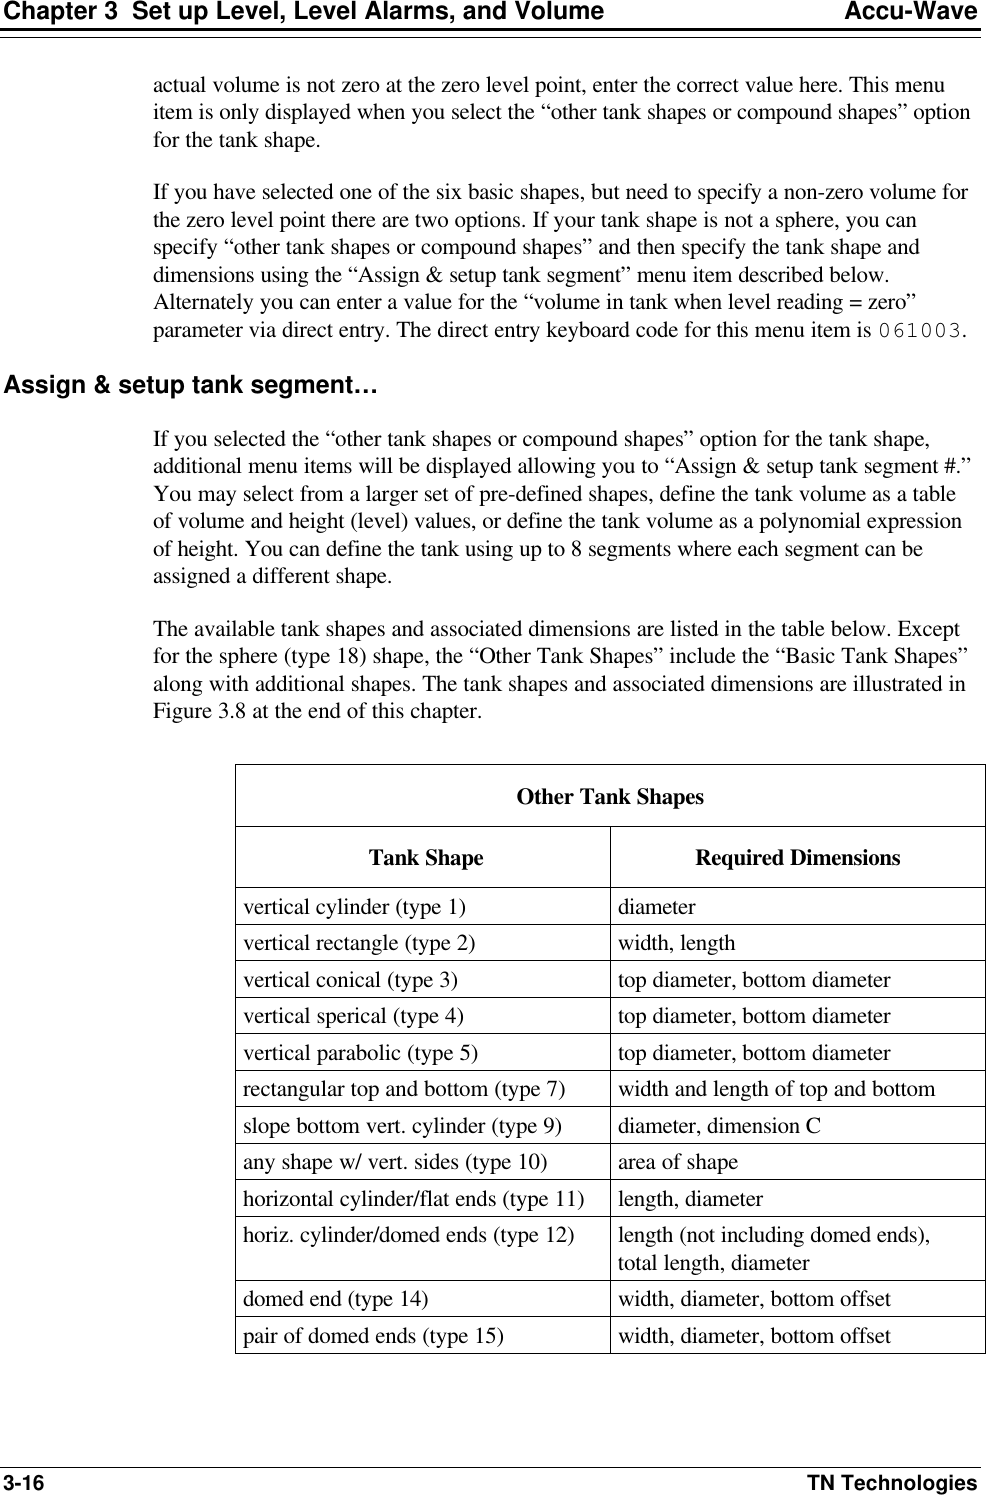 Chapter 3  Set up Level, Level Alarms, and Volume Accu-Wave 3-16 TN Technologies actual volume is not zero at the zero level point, enter the correct value here. This menu item is only displayed when you select the “other tank shapes or compound shapes” option for the tank shape. If you have selected one of the six basic shapes, but need to specify a non-zero volume for the zero level point there are two options. If your tank shape is not a sphere, you can specify “other tank shapes or compound shapes” and then specify the tank shape and dimensions using the “Assign &amp; setup tank segment” menu item described below. Alternately you can enter a value for the “volume in tank when level reading = zero” parameter via direct entry. The direct entry keyboard code for this menu item is 061003. Assign &amp; setup tank segment… If you selected the “other tank shapes or compound shapes” option for the tank shape, additional menu items will be displayed allowing you to “Assign &amp; setup tank segment #.” You may select from a larger set of pre-defined shapes, define the tank volume as a table of volume and height (level) values, or define the tank volume as a polynomial expression of height. You can define the tank using up to 8 segments where each segment can be assigned a different shape. The available tank shapes and associated dimensions are listed in the table below. Except for the sphere (type 18) shape, the “Other Tank Shapes” include the “Basic Tank Shapes” along with additional shapes. The tank shapes and associated dimensions are illustrated in Figure 3.8 at the end of this chapter.  Other Tank Shapes  Tank Shape Required Dimensions vertical cylinder (type 1) diameter vertical rectangle (type 2) width, length vertical conical (type 3) top diameter, bottom diameter vertical sperical (type 4) top diameter, bottom diameter vertical parabolic (type 5) top diameter, bottom diameter rectangular top and bottom (type 7) width and length of top and bottom slope bottom vert. cylinder (type 9) diameter, dimension C any shape w/ vert. sides (type 10) area of shape horizontal cylinder/flat ends (type 11) length, diameter horiz. cylinder/domed ends (type 12) length (not including domed ends),  total length, diameter domed end (type 14) width, diameter, bottom offset pair of domed ends (type 15) width, diameter, bottom offset 